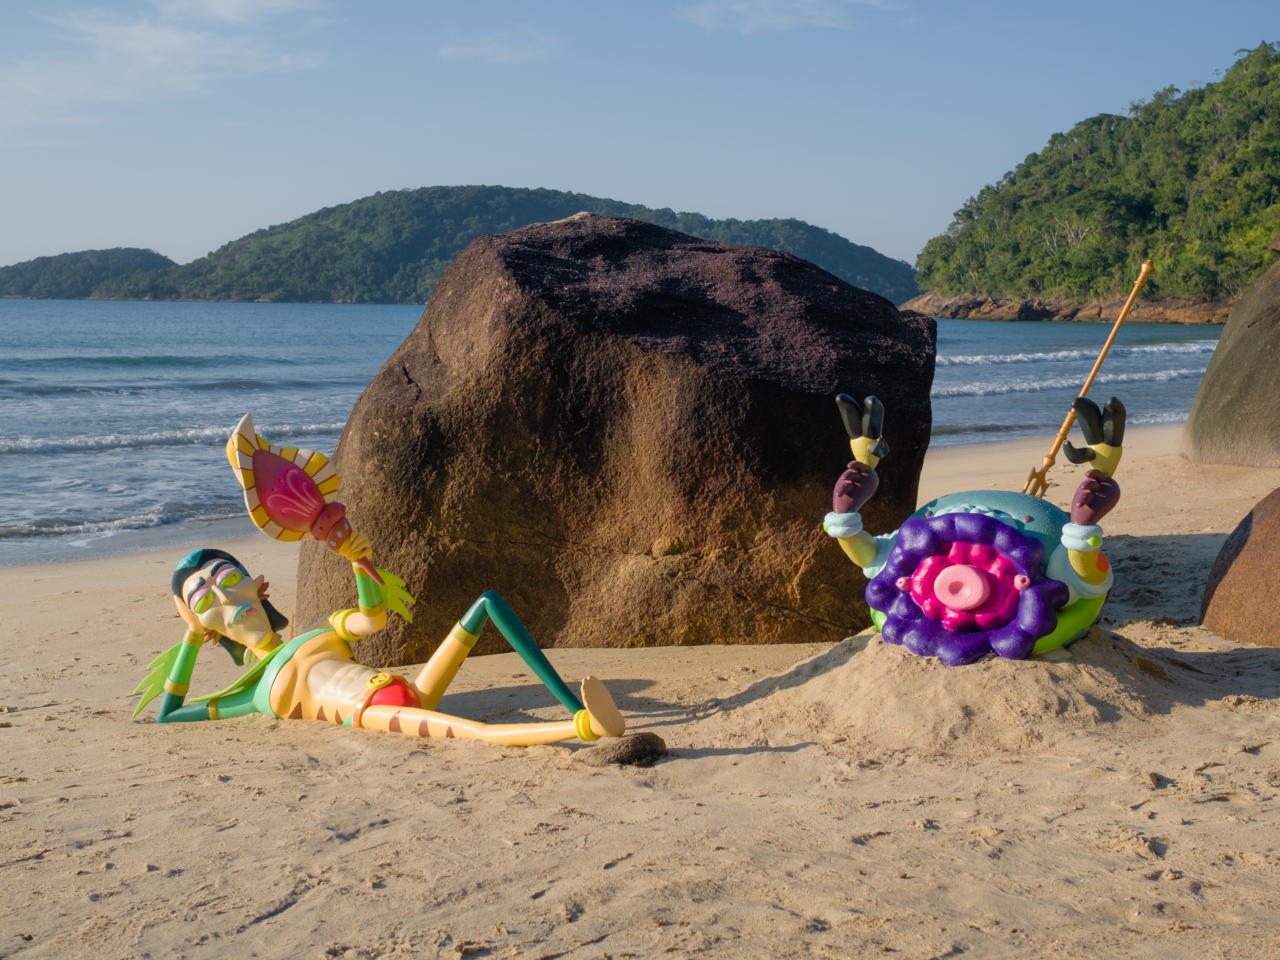 A sculpture of Rick and Morty character Mr. Nimbus at Praia do Léo in Brazil. The scene is part of the ongoing #WORMAGEDDON fan experience leading to the global release of Adult Swim’s Rick and Morty season six starting September 4, 2022. (Courtesy Adult Swim)